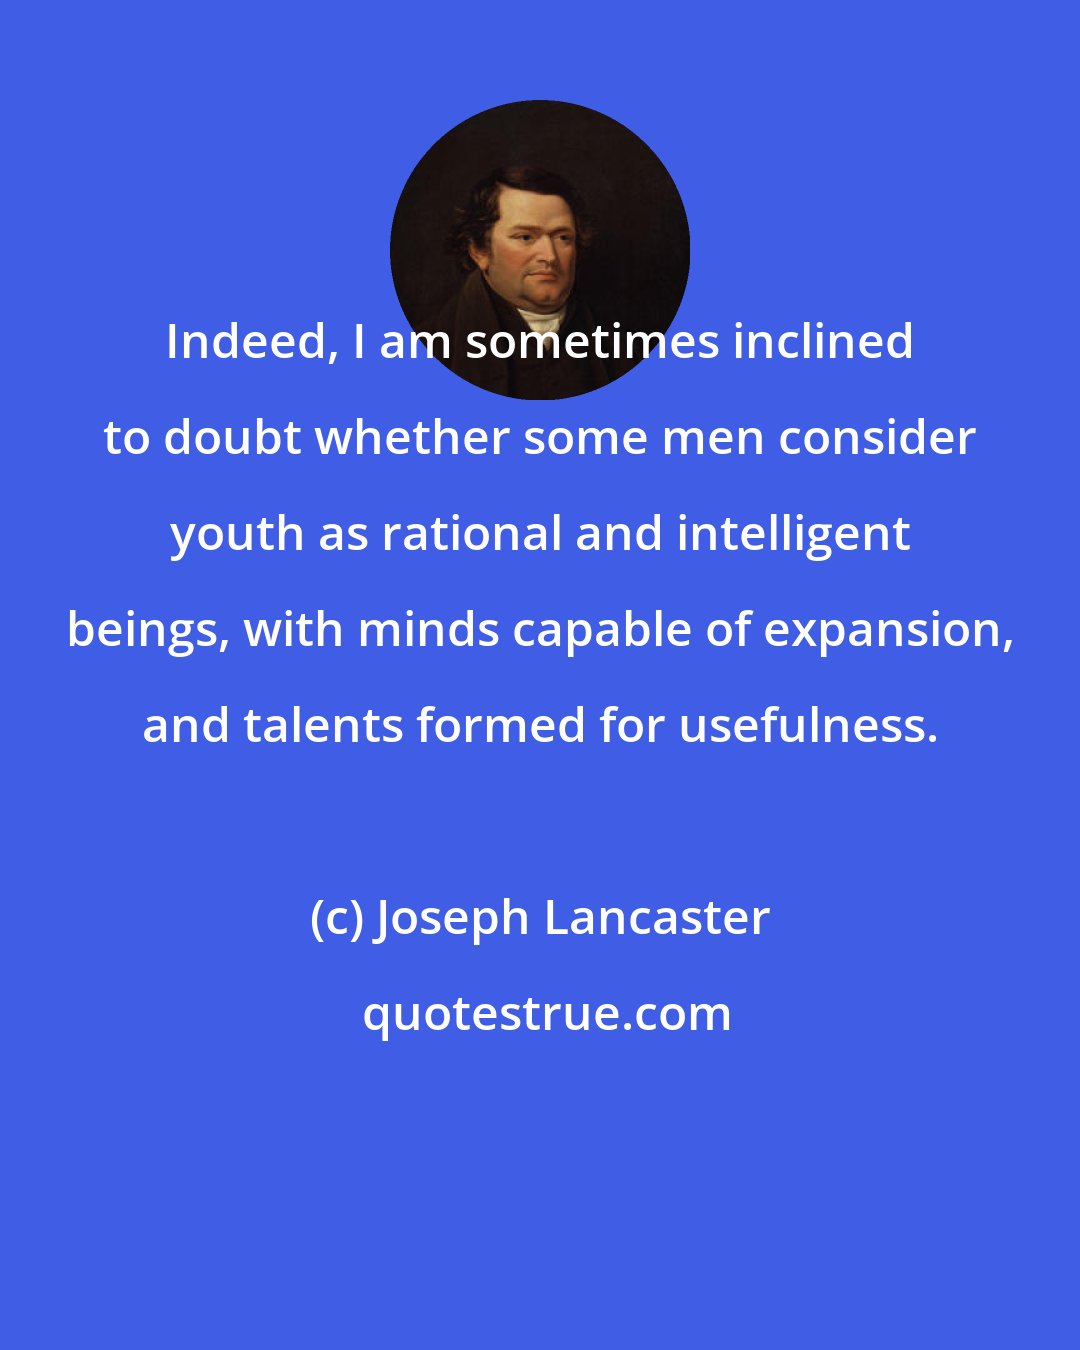 Joseph Lancaster: Indeed, I am sometimes inclined to doubt whether some men consider youth as rational and intelligent beings, with minds capable of expansion, and talents formed for usefulness.